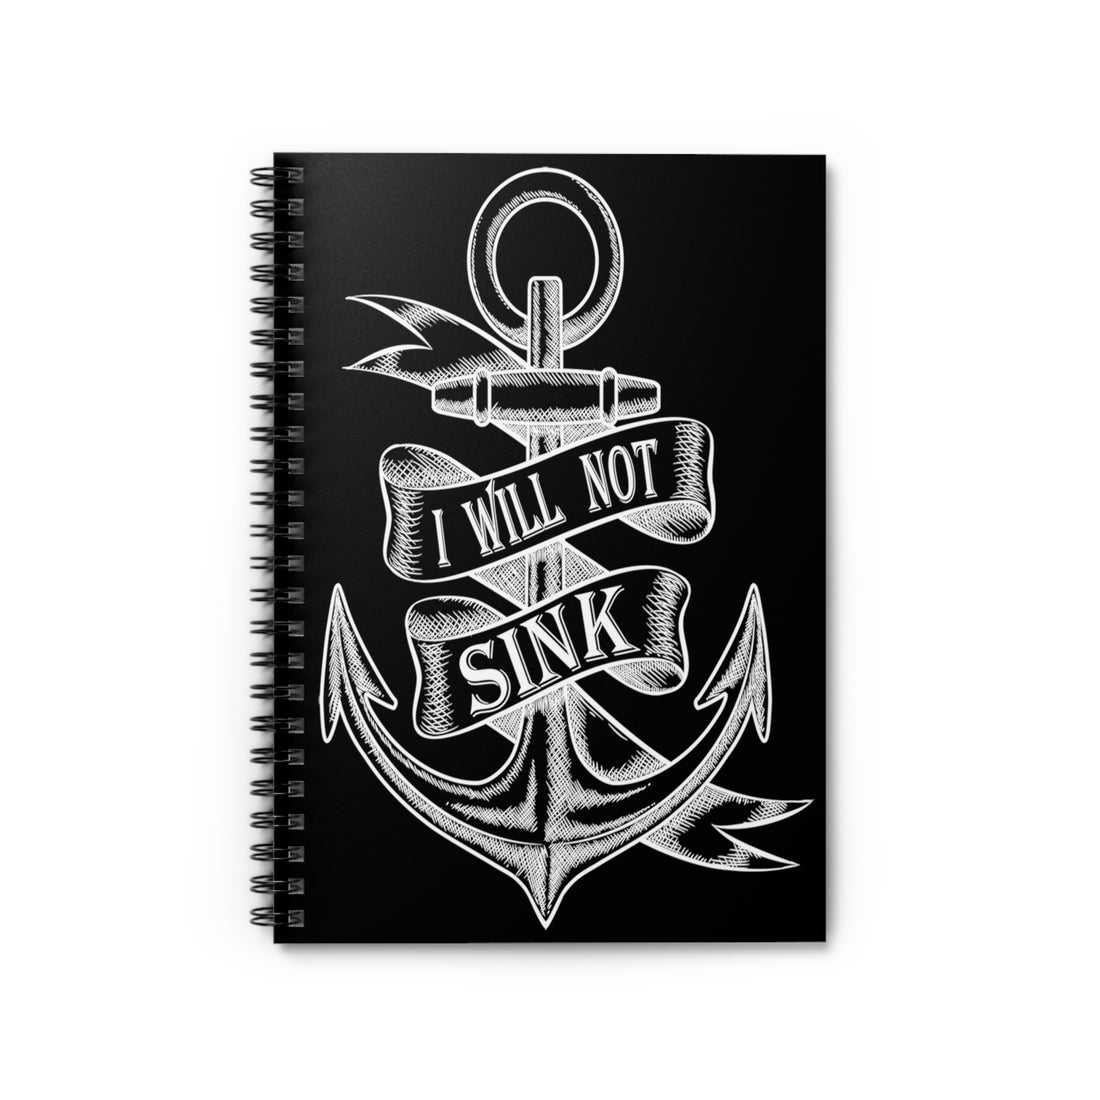 I Will Not Sink - Spiral Notebook - Ruled Line